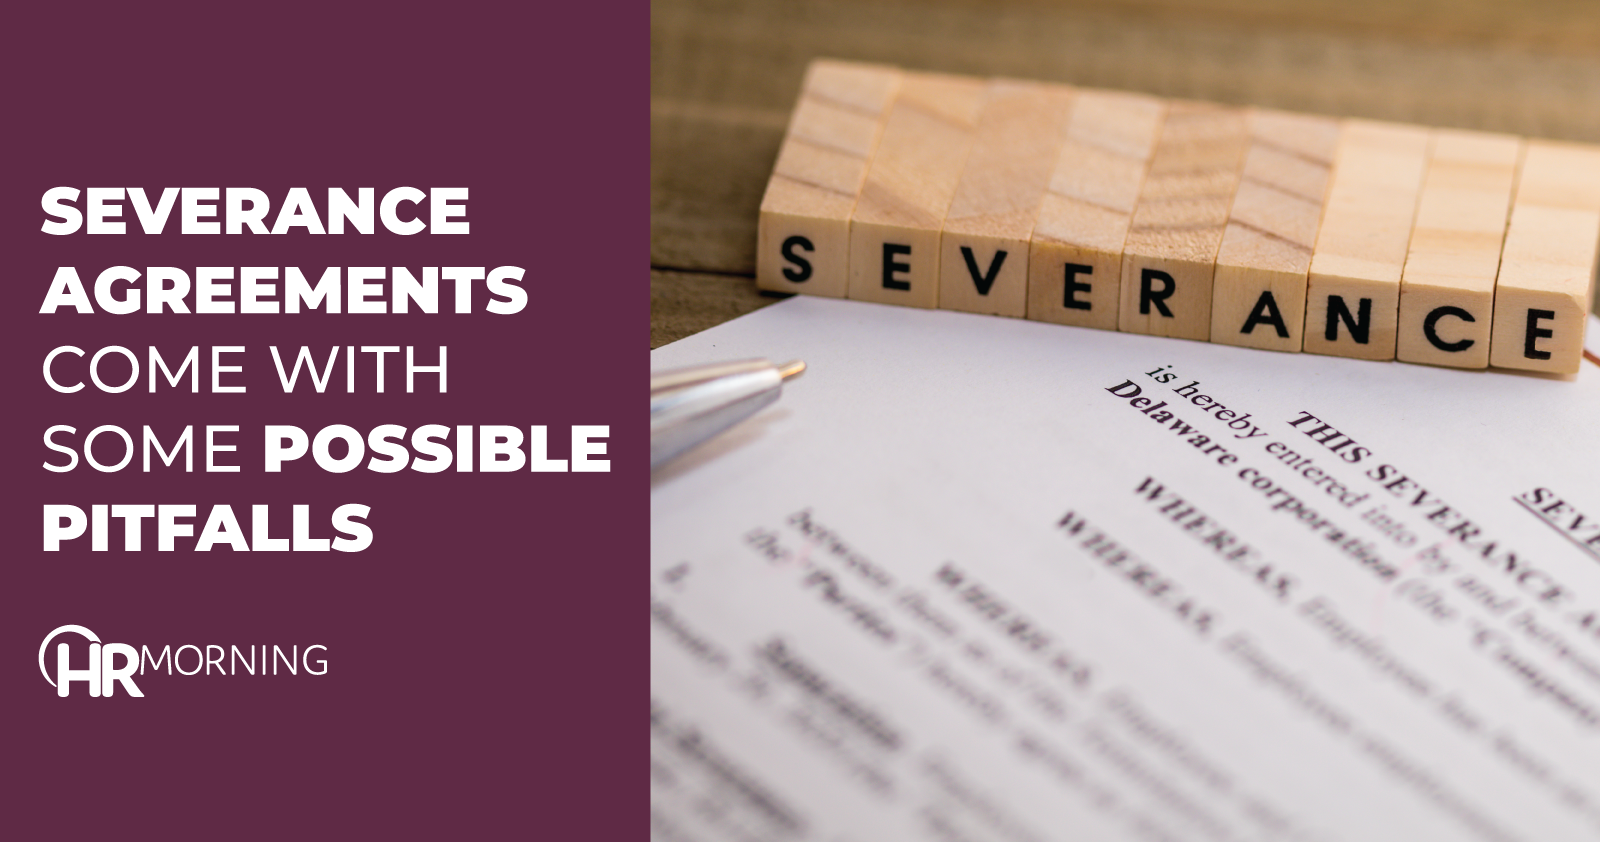 Severance agreements come with some possible pitfalls